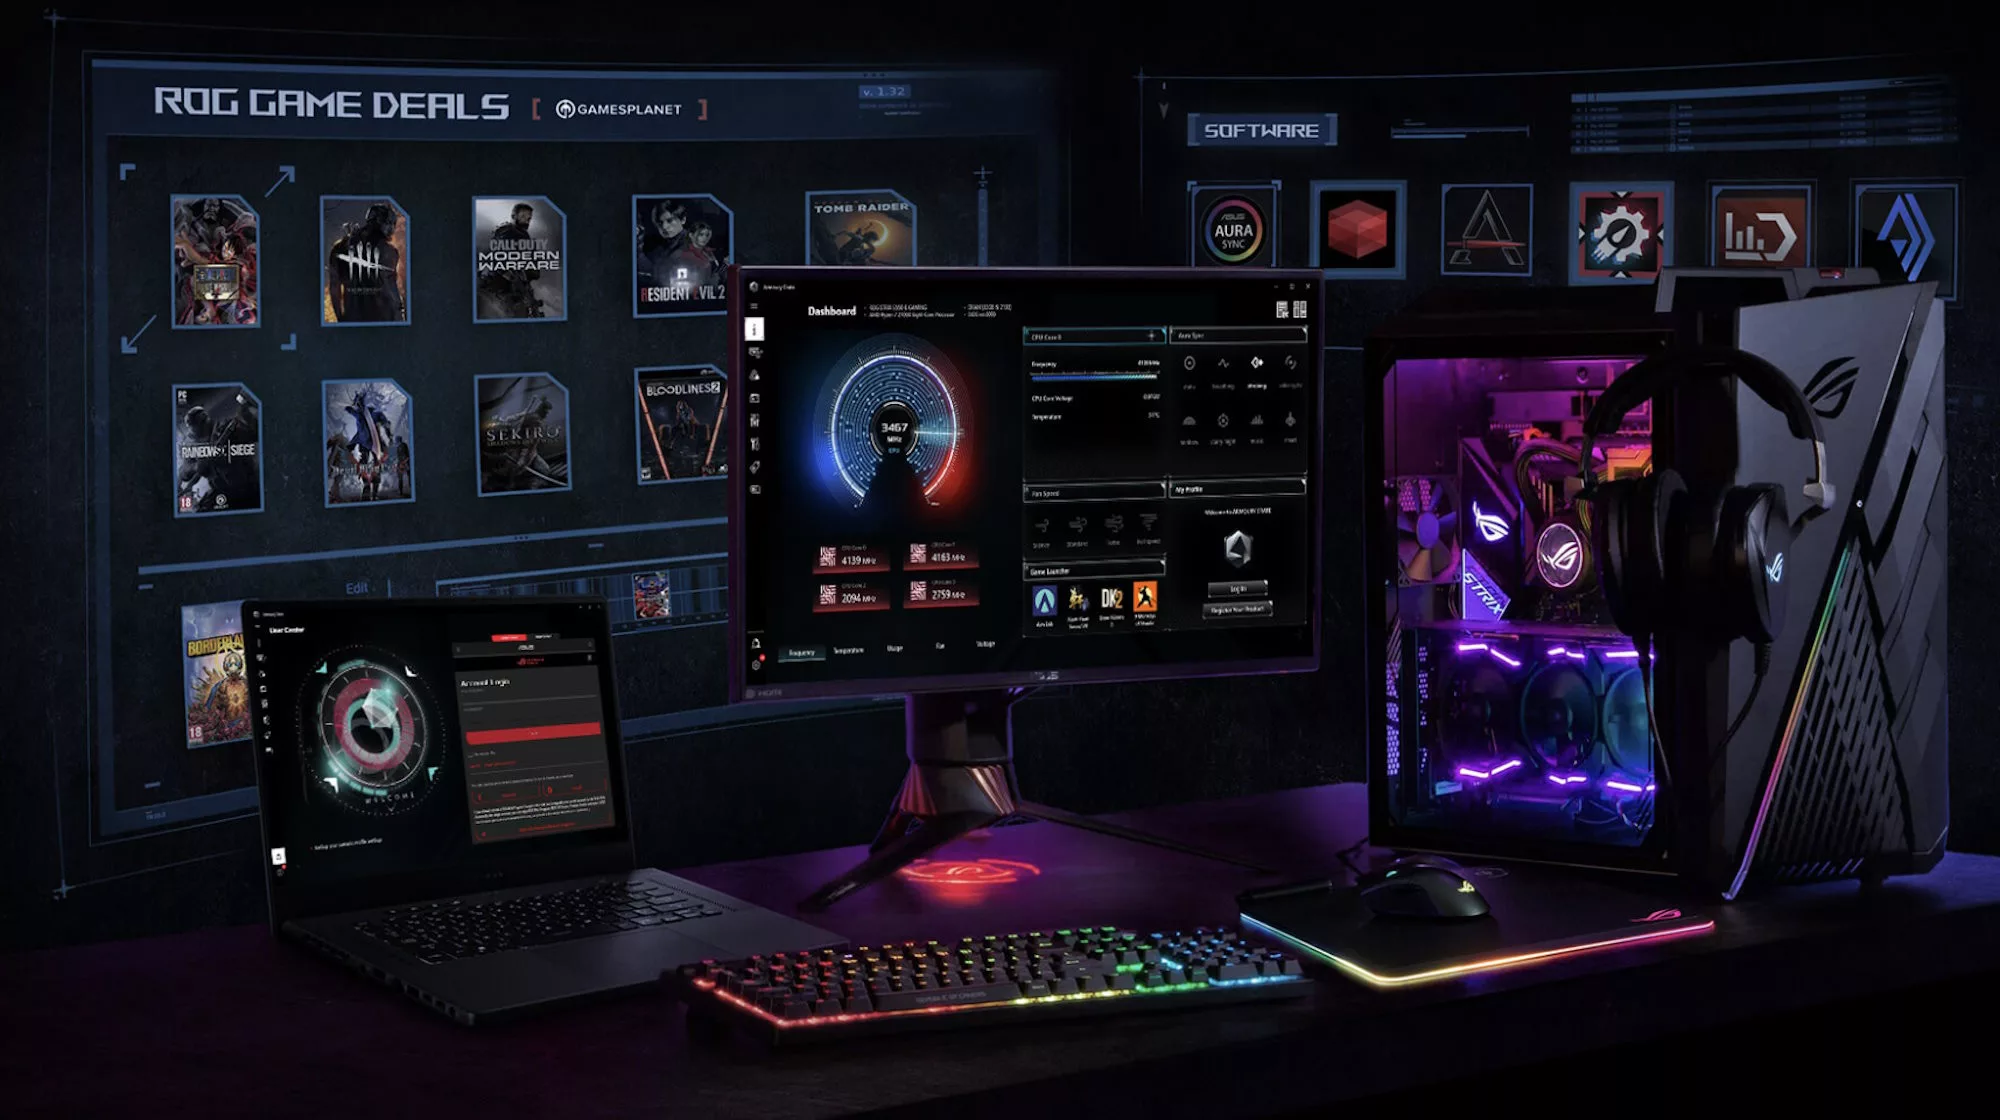 A view of a full gaming desktop setup with the Armoury Crate app visible on the display